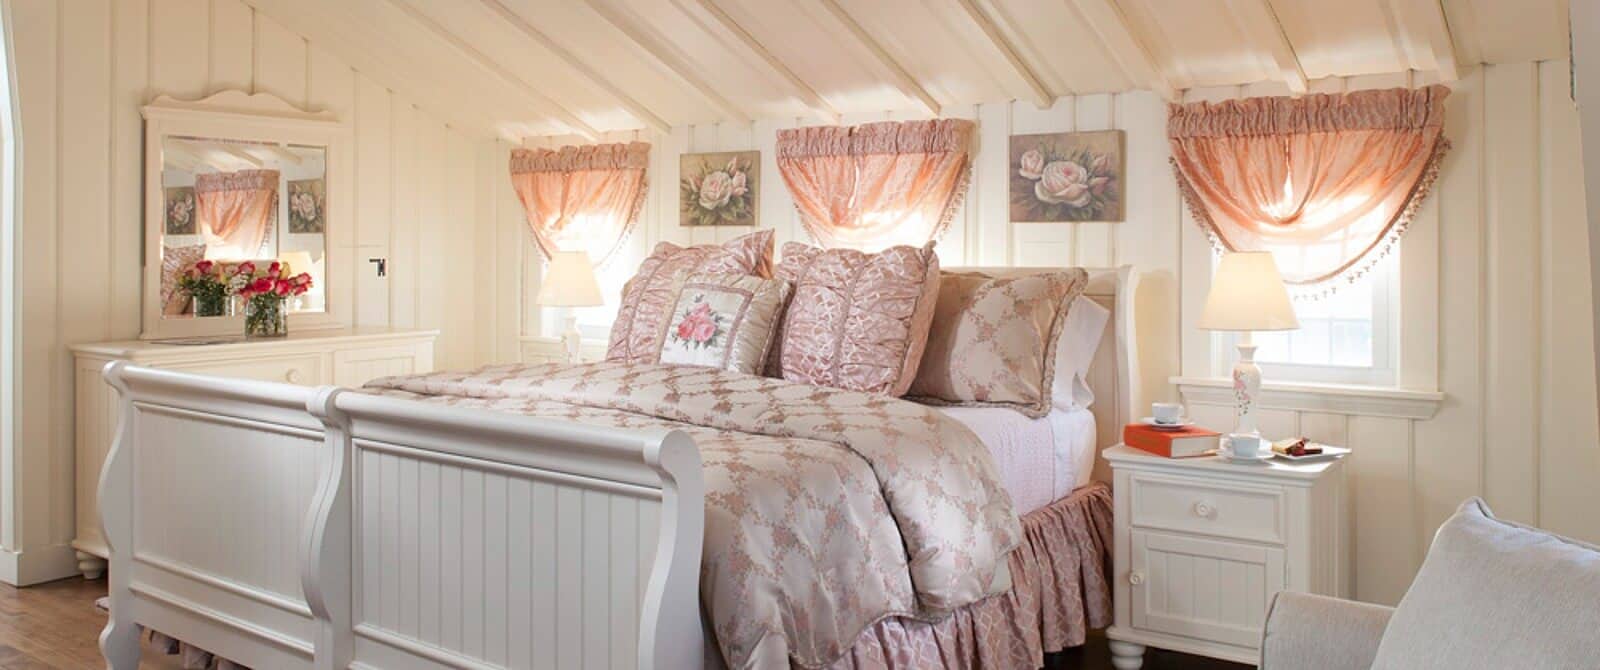 Quaint bedroom with white sleigh bed, shiplap walls and ceilings and dresser with mirror